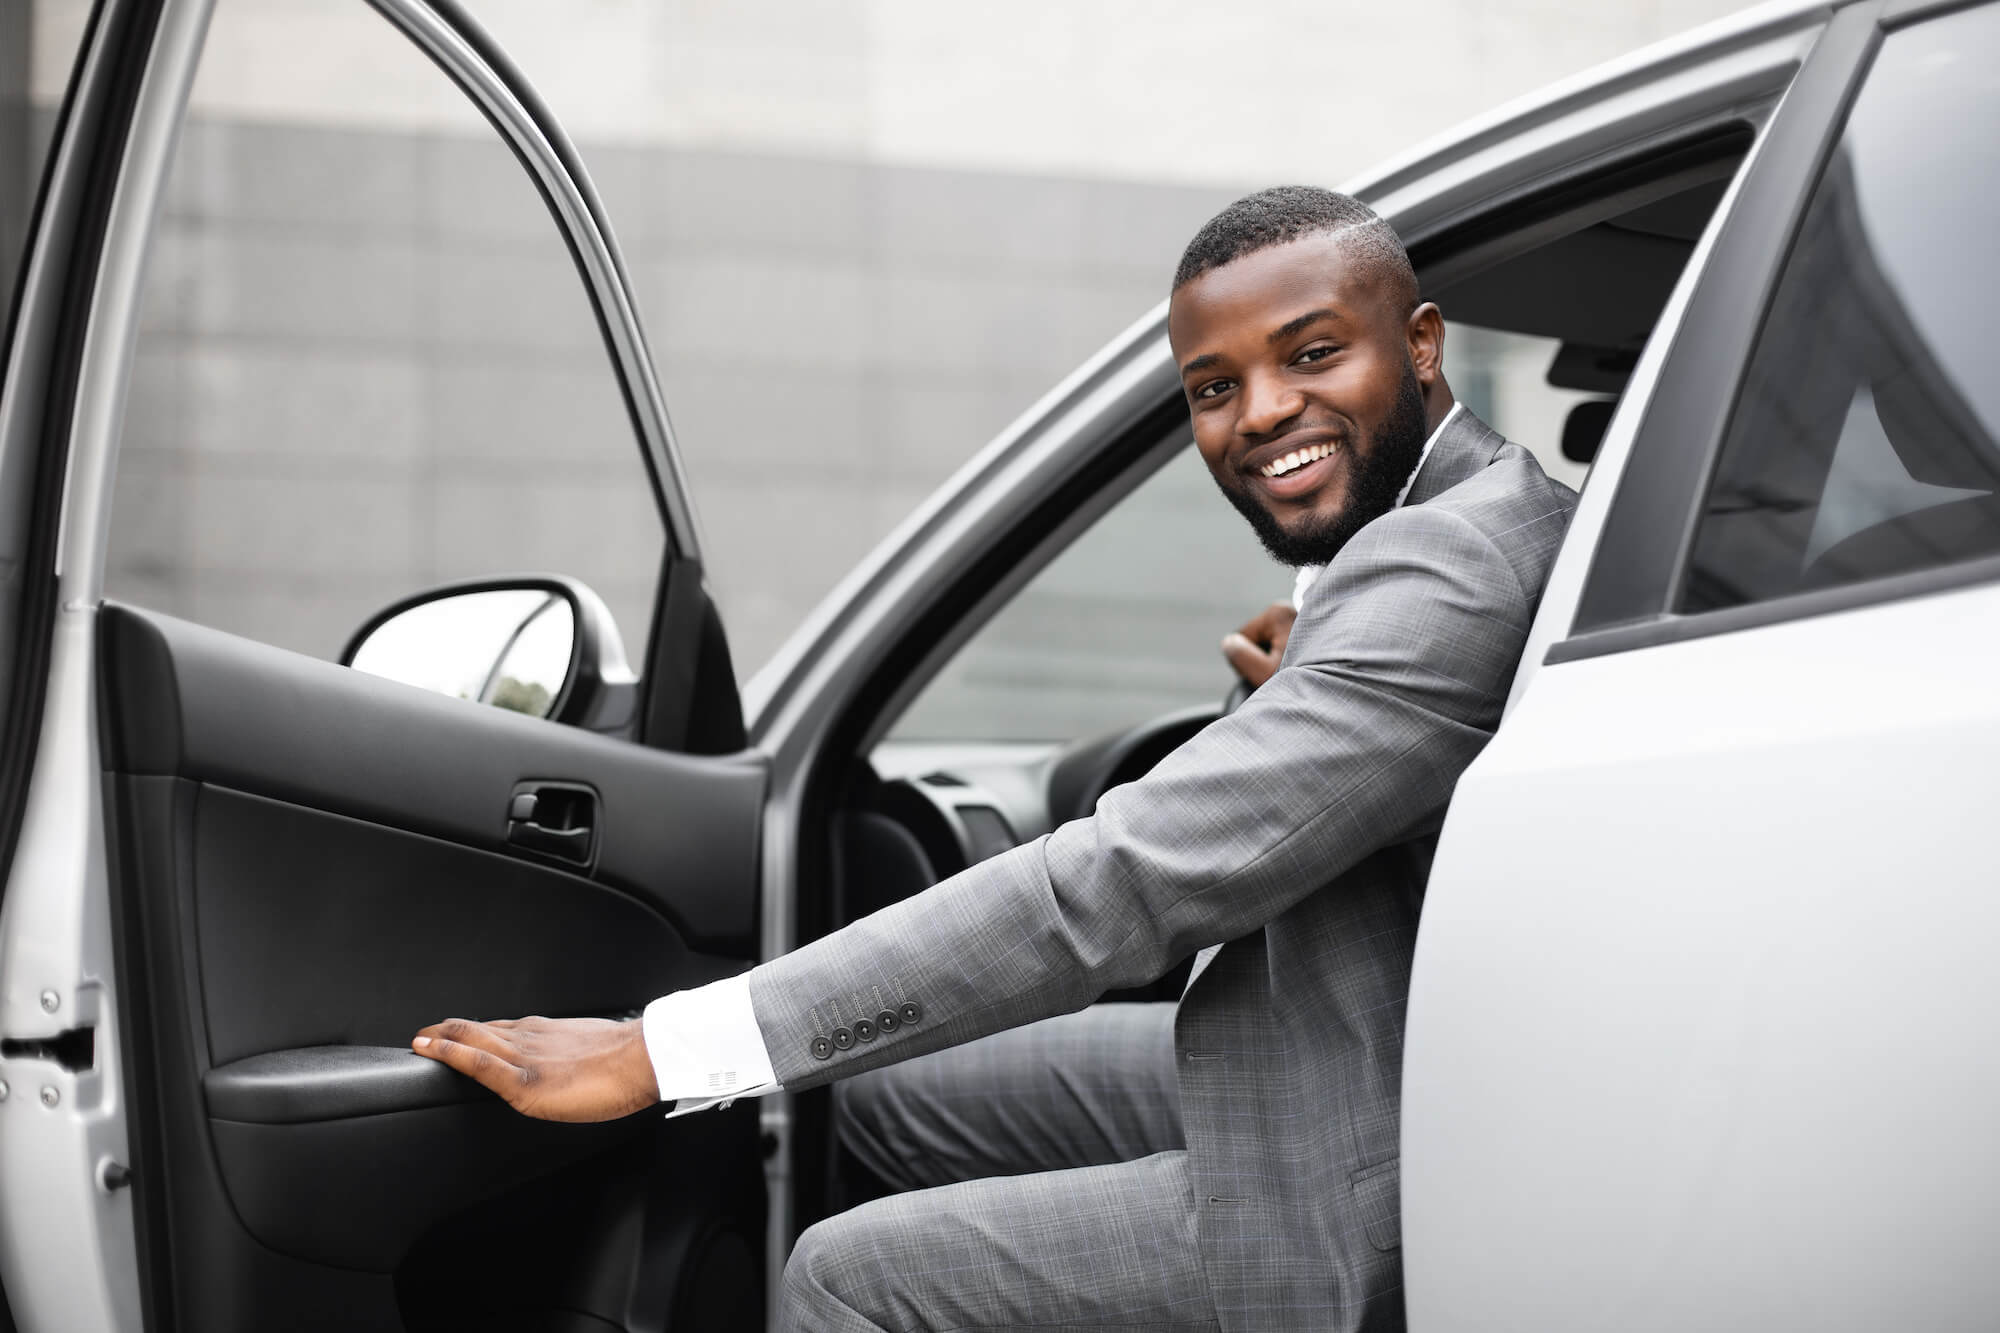 personal driving services near me, Private Chauffeur Services near me, Luxury chauffeur service near me